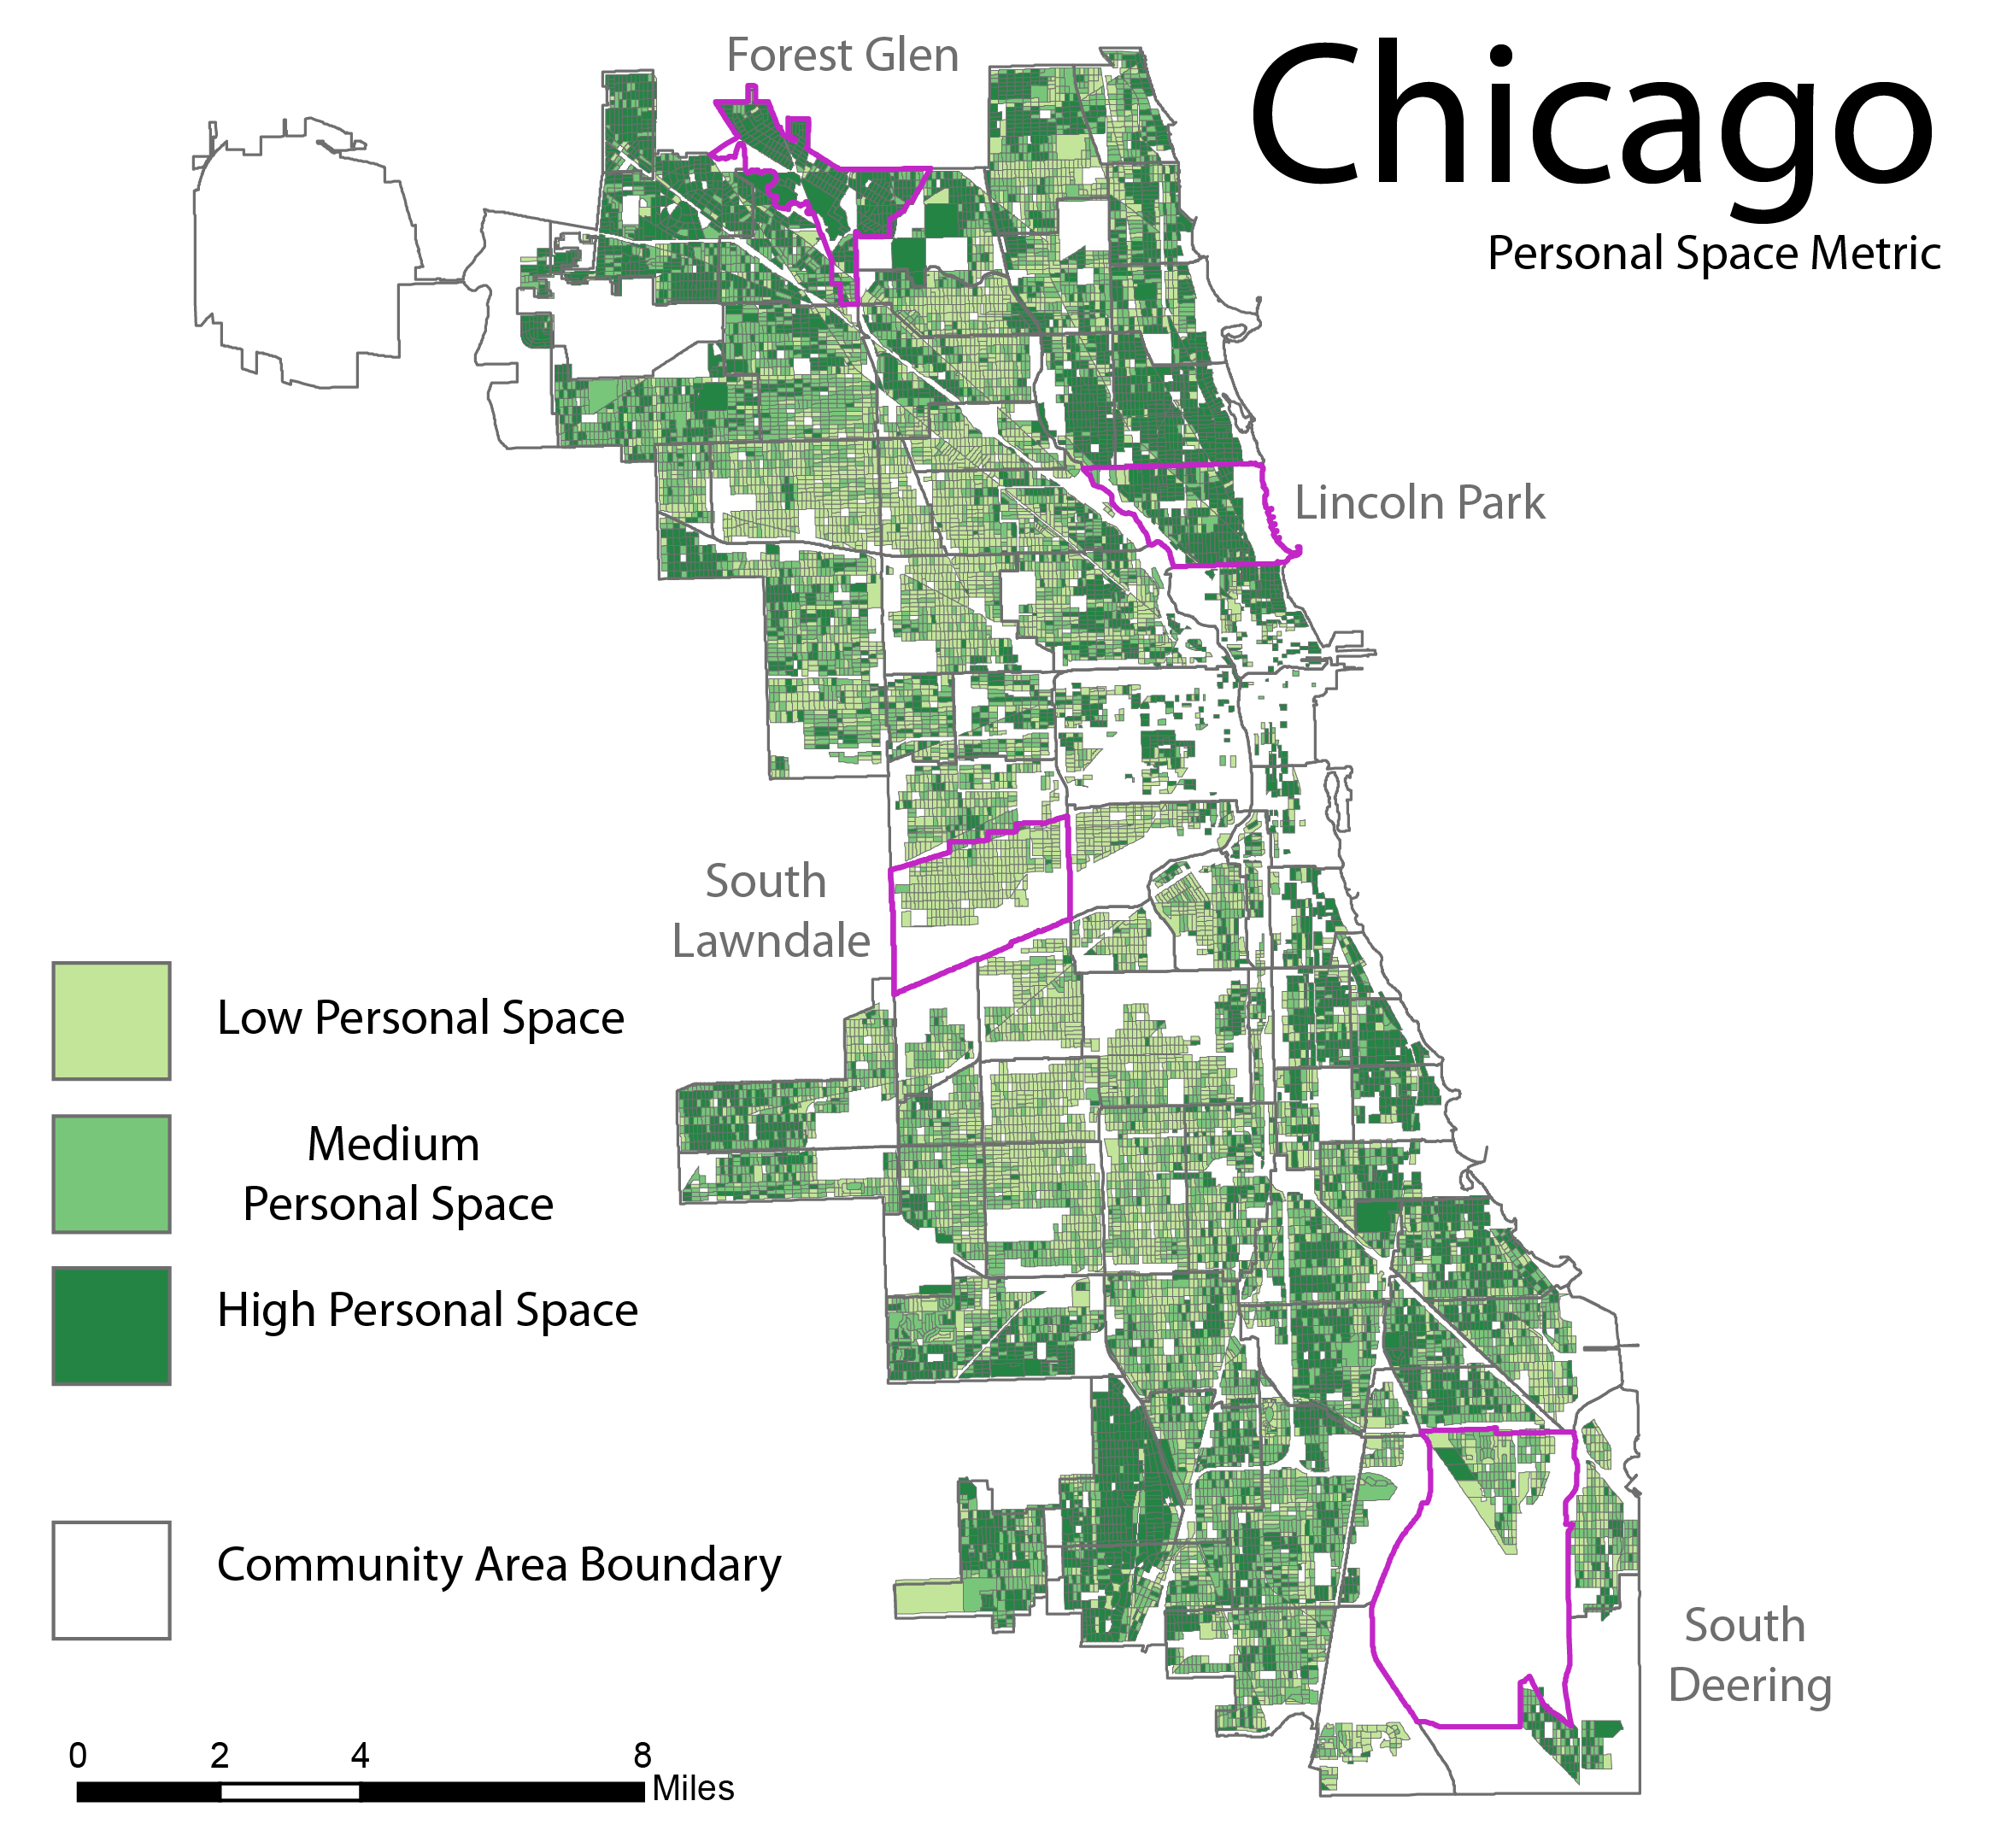 Scale, Matter, and Meaning: Sizing up Maps – The Chicago Center